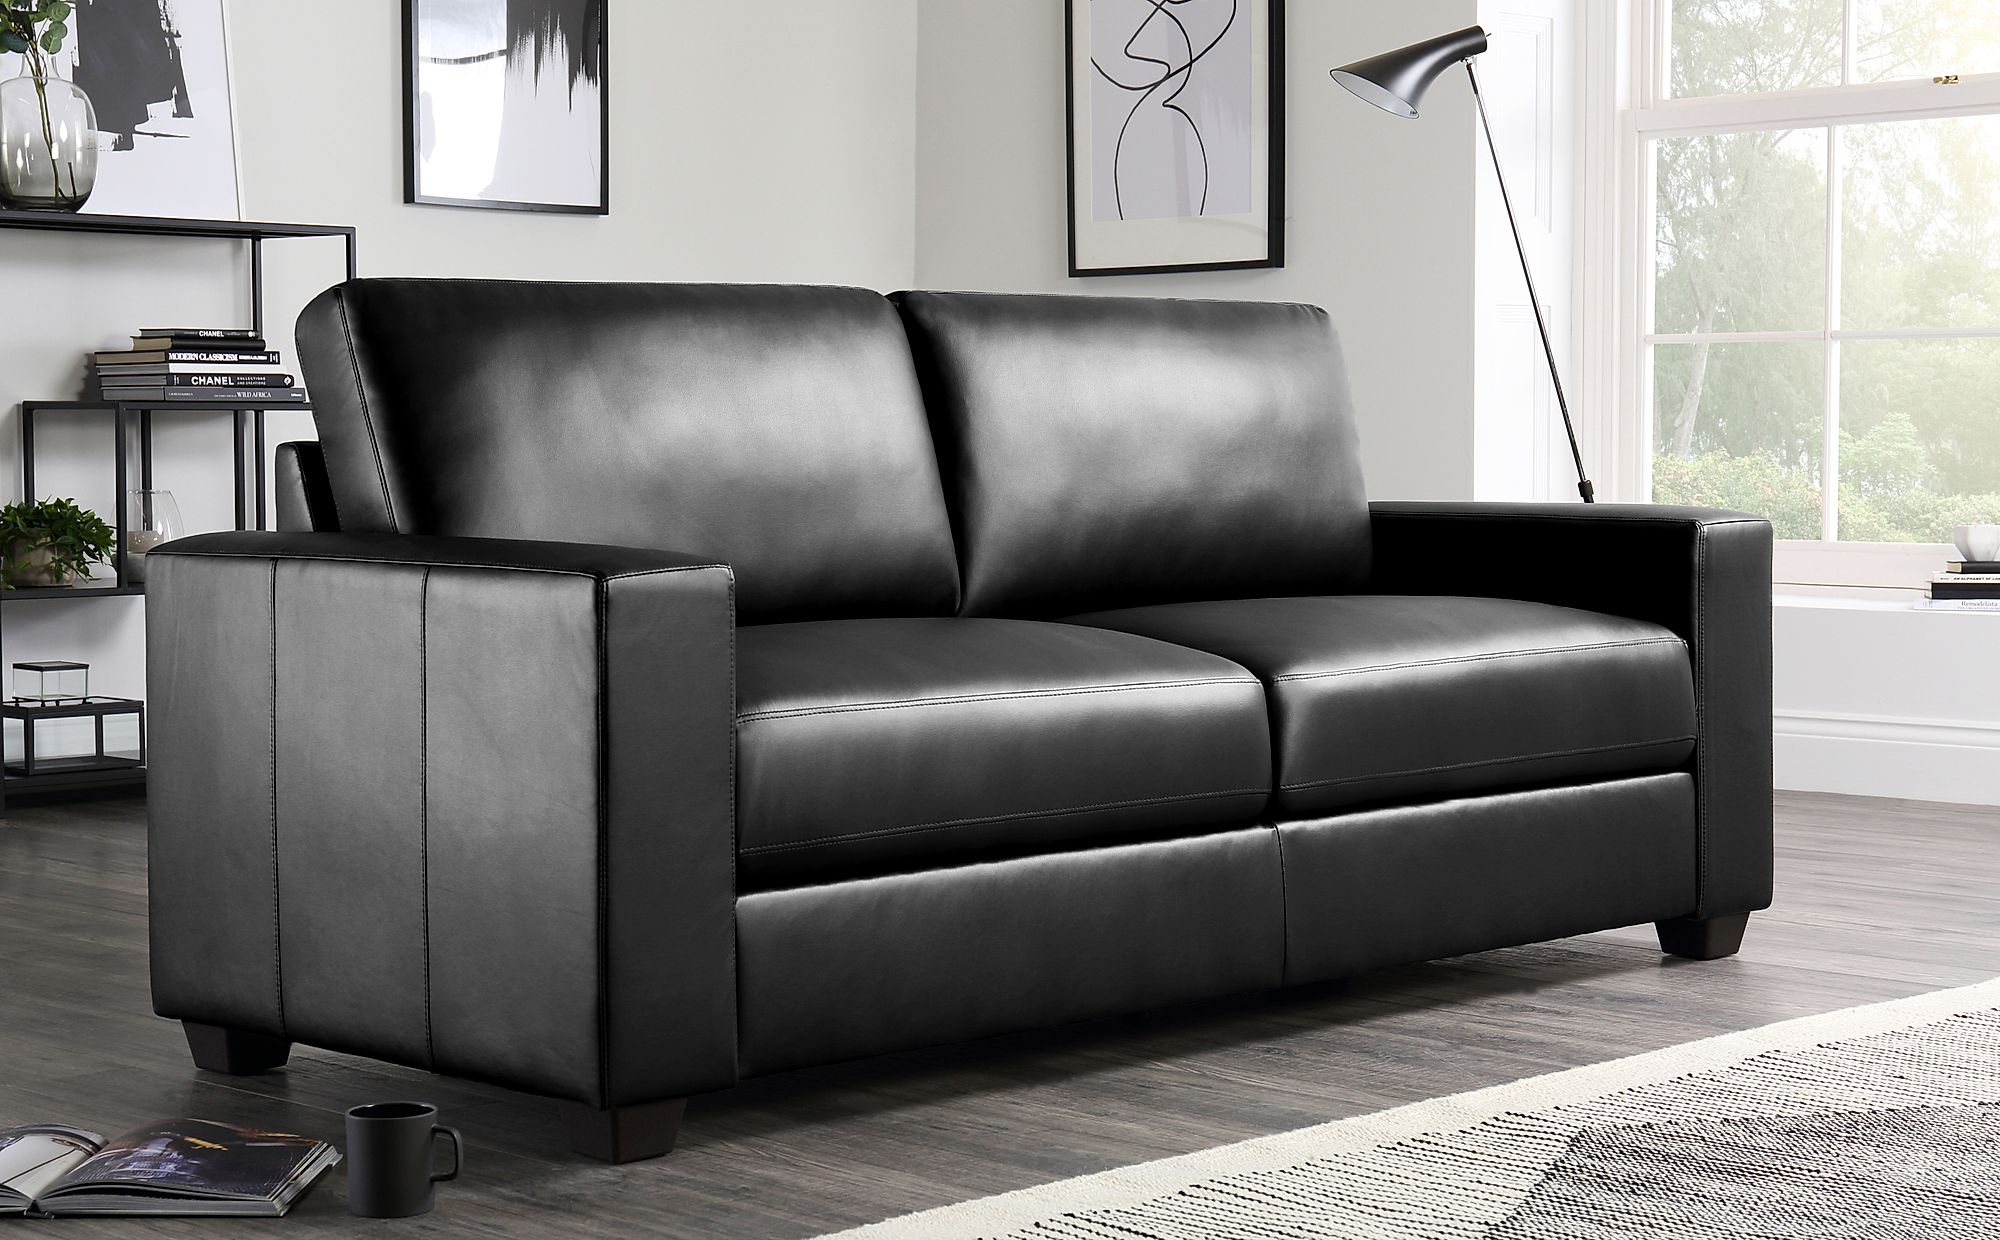 3 seater leather sofa size